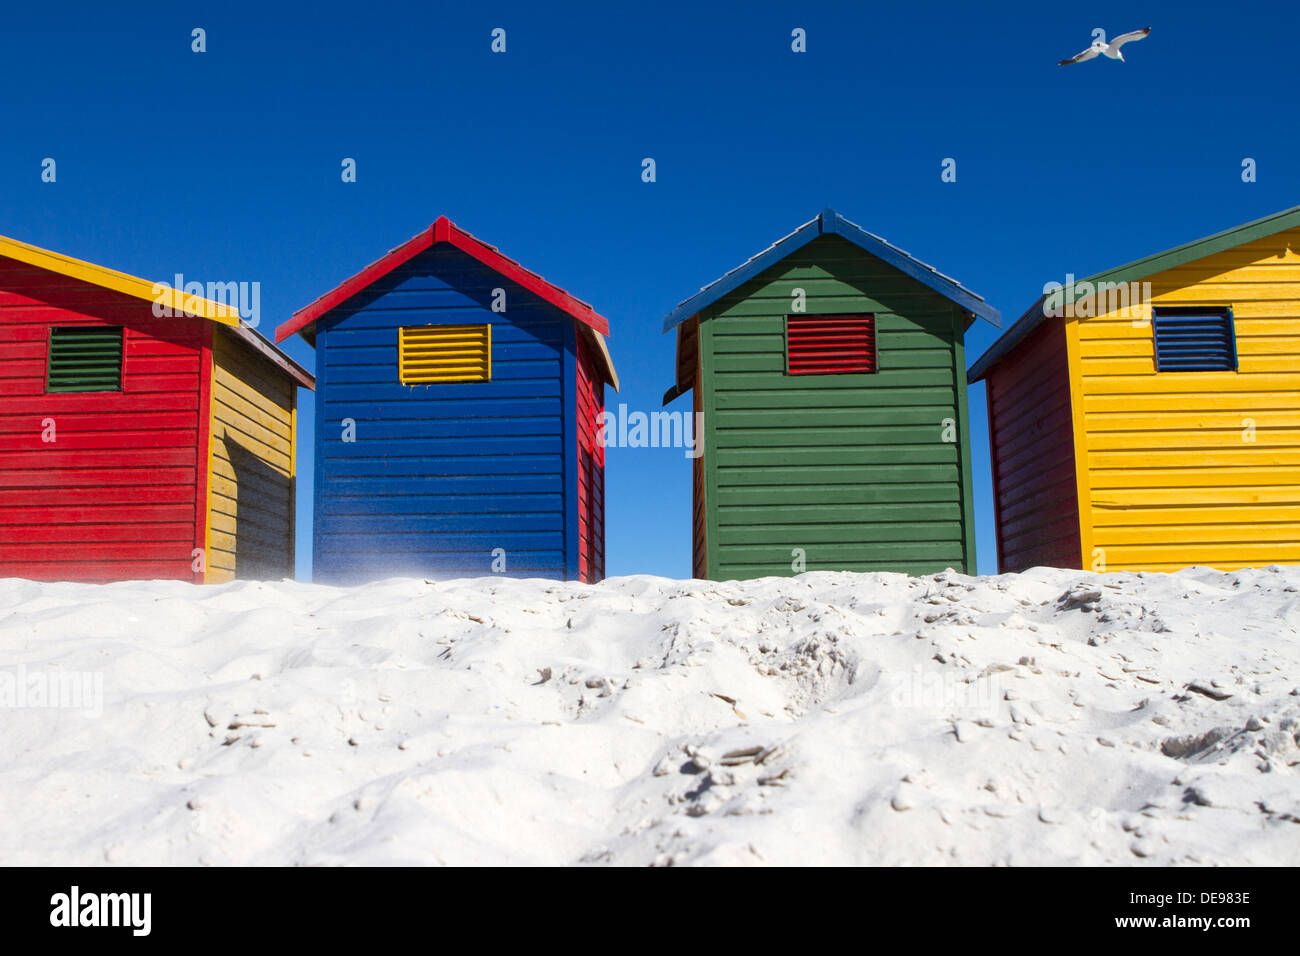 A row of brightly coloured beach huts and a seagull. Stock Photo